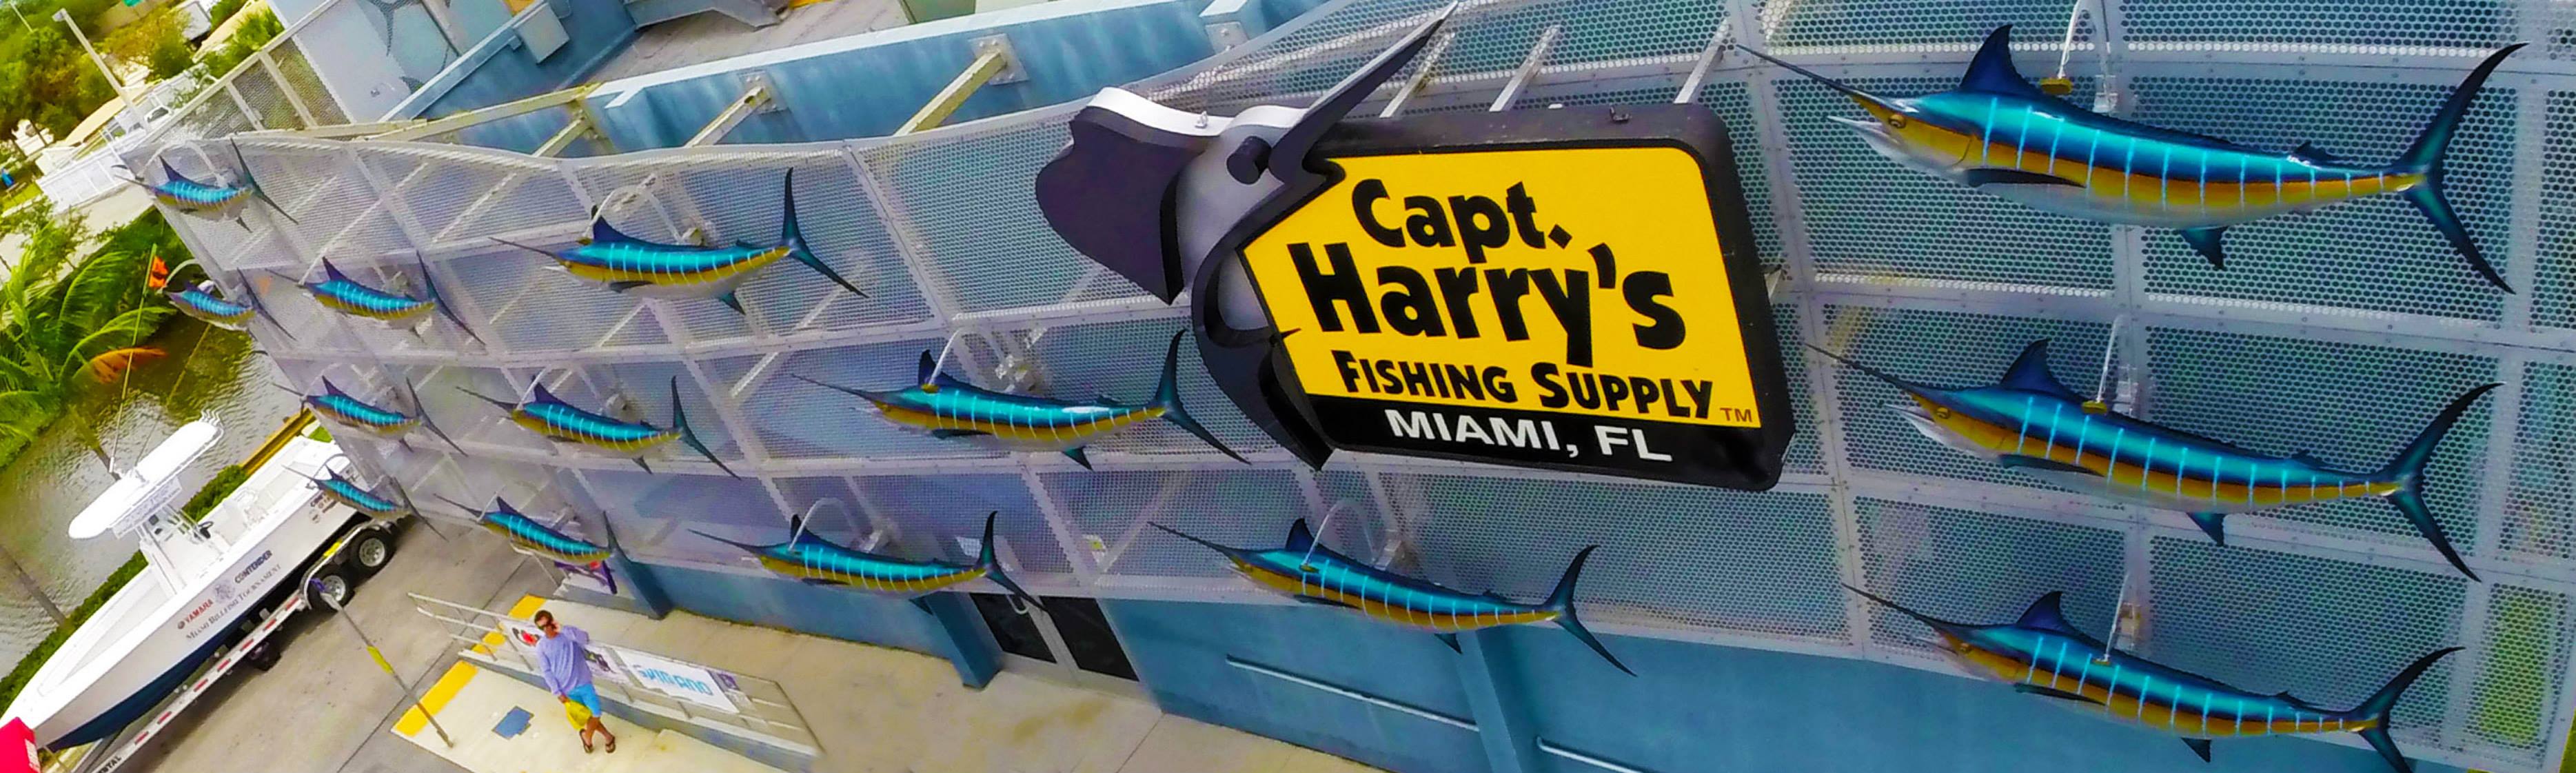 Seaqualizer Snap Swivels – Capt. Harry's Fishing Supply